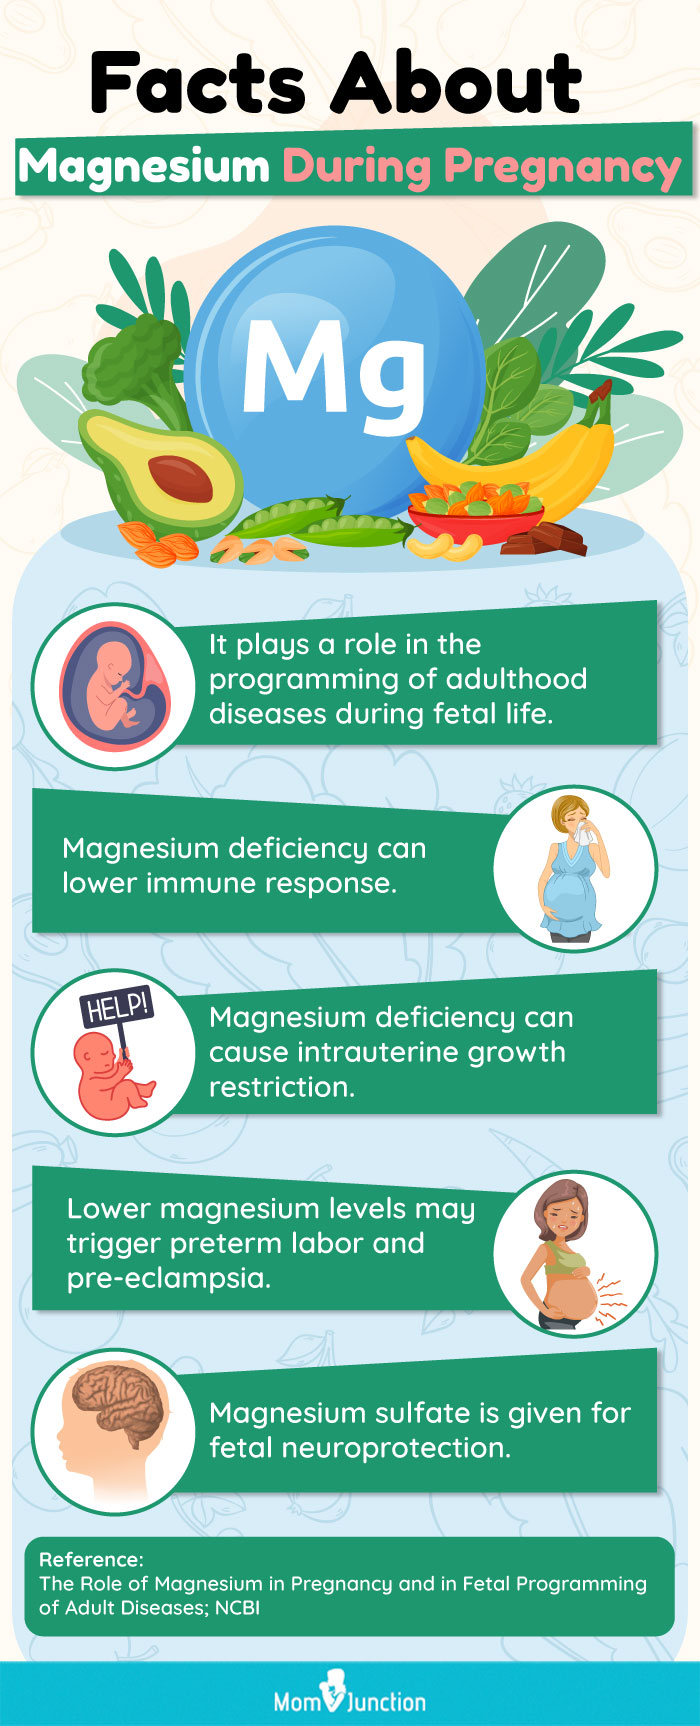 facts about magnesium during pregnancy [infographic]